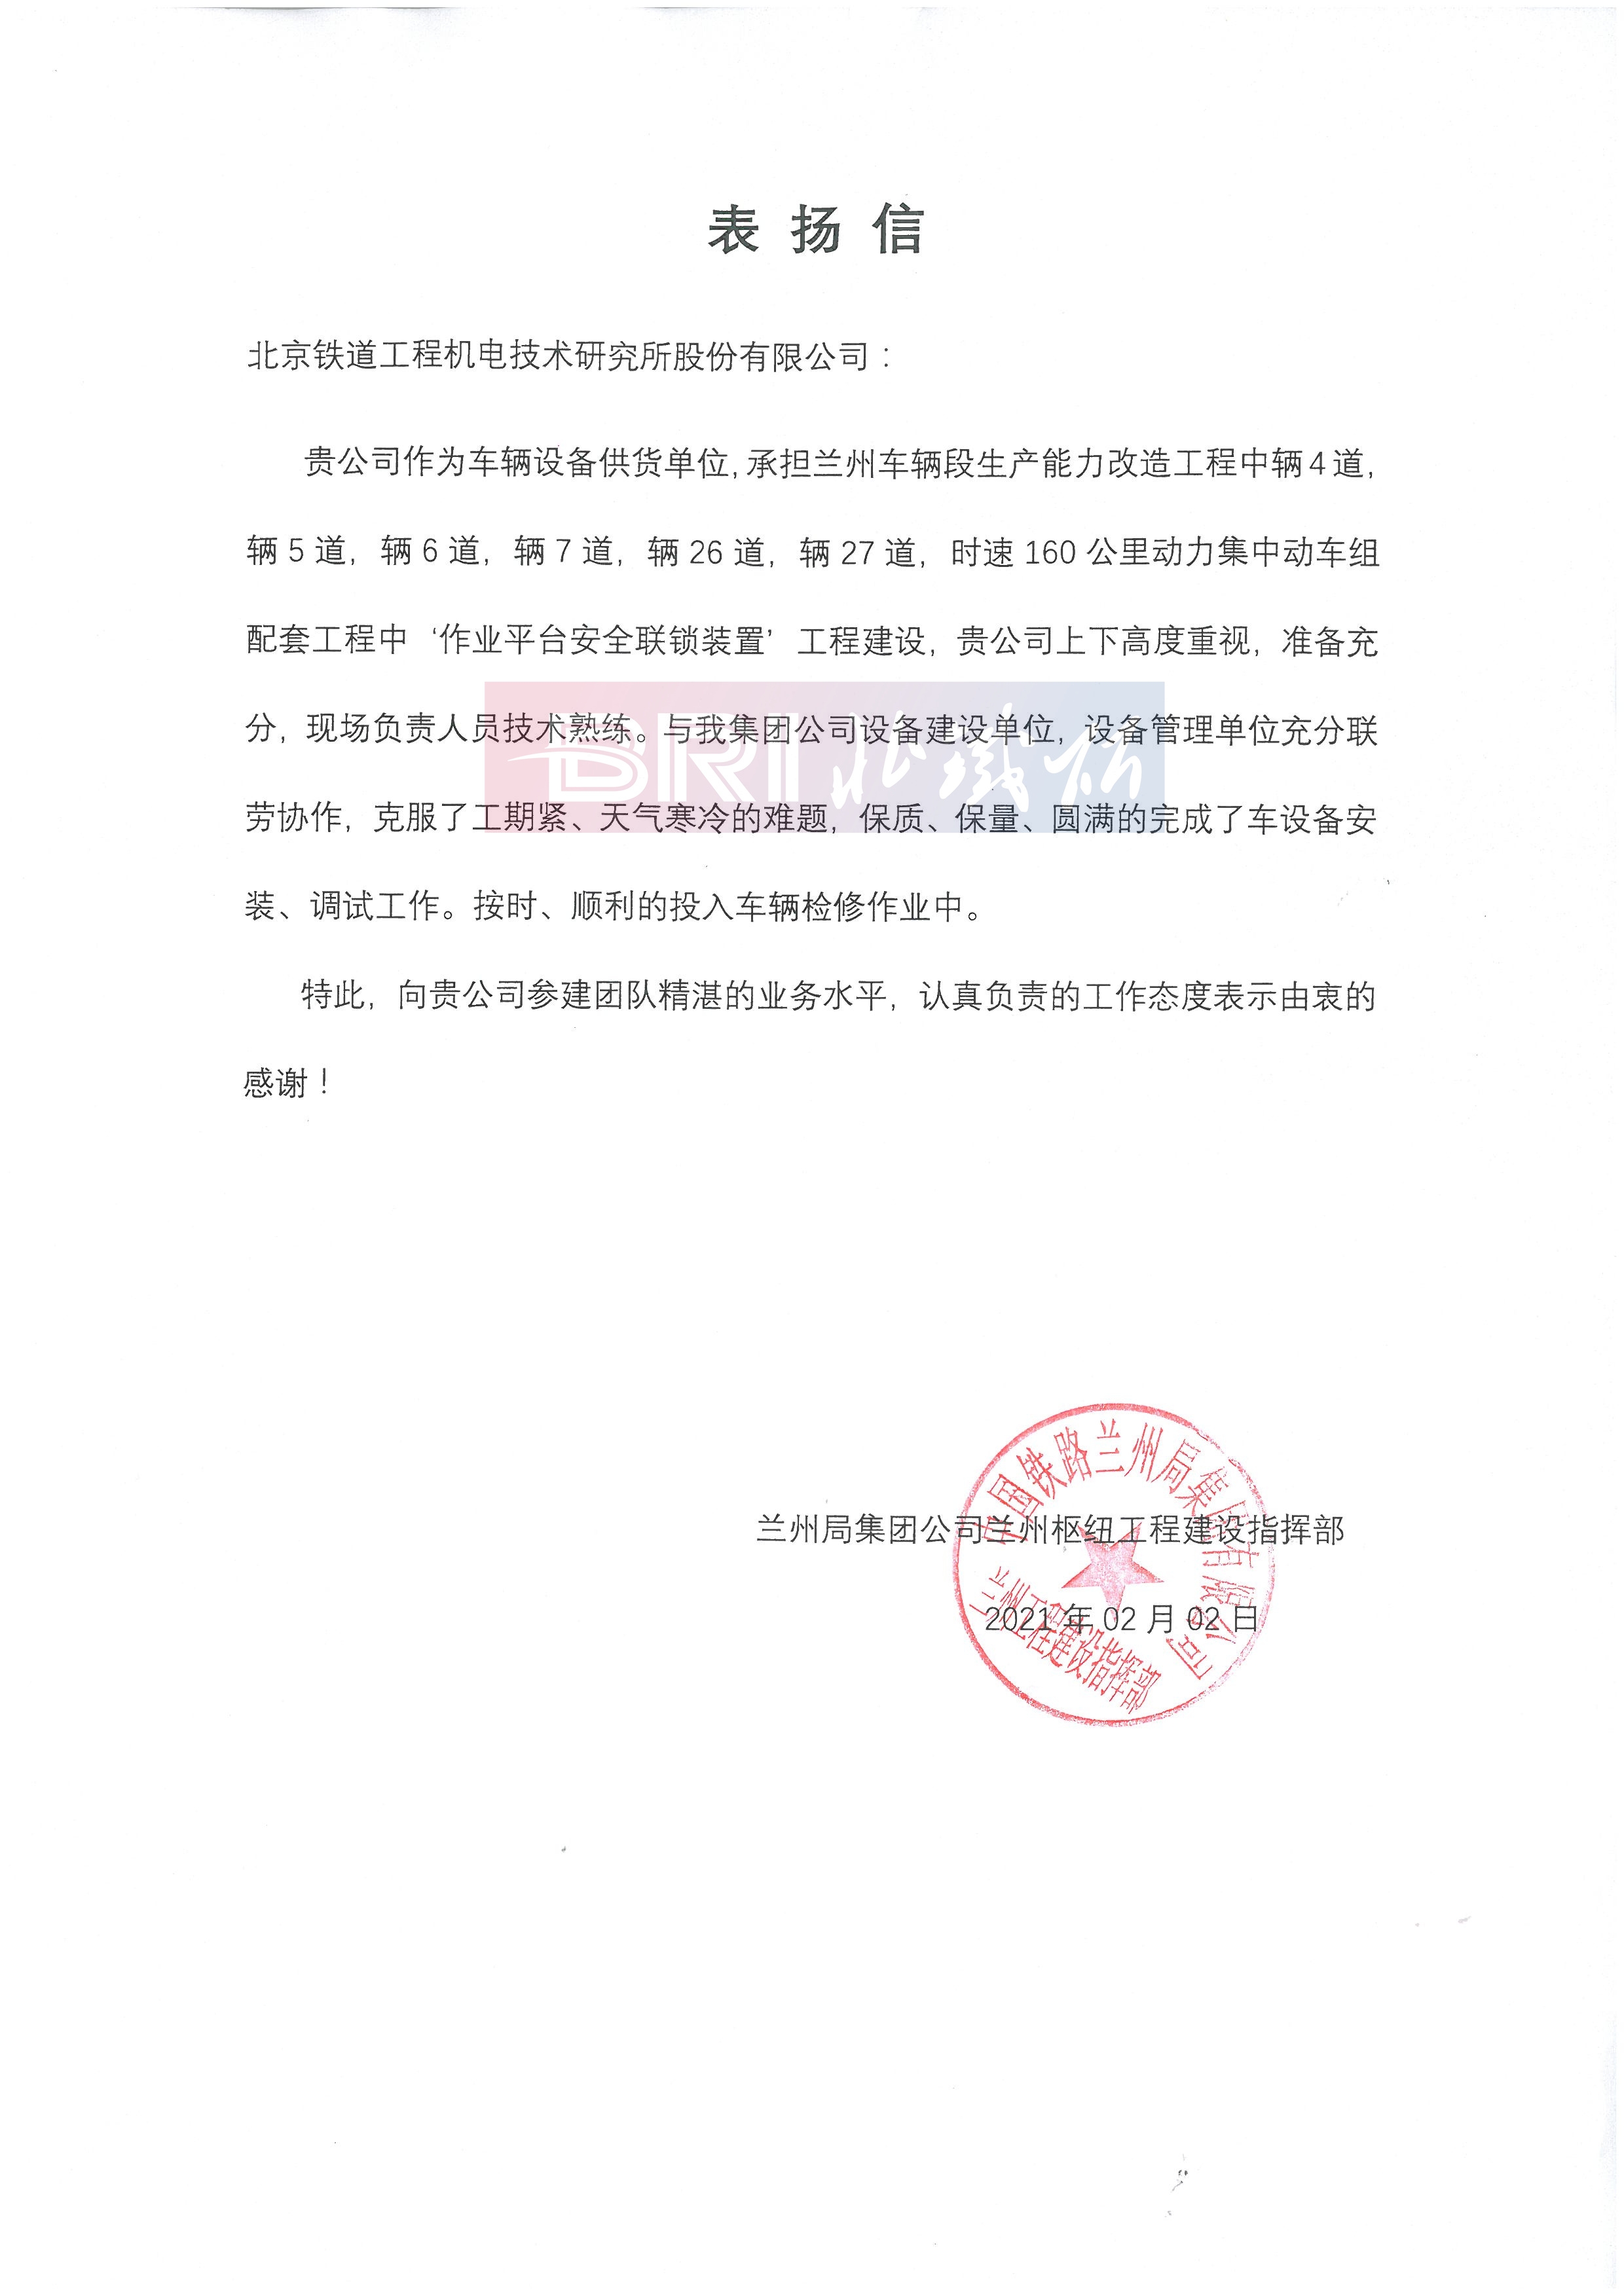 The commendation letter from Lanzhou Hub Construction Headquarters